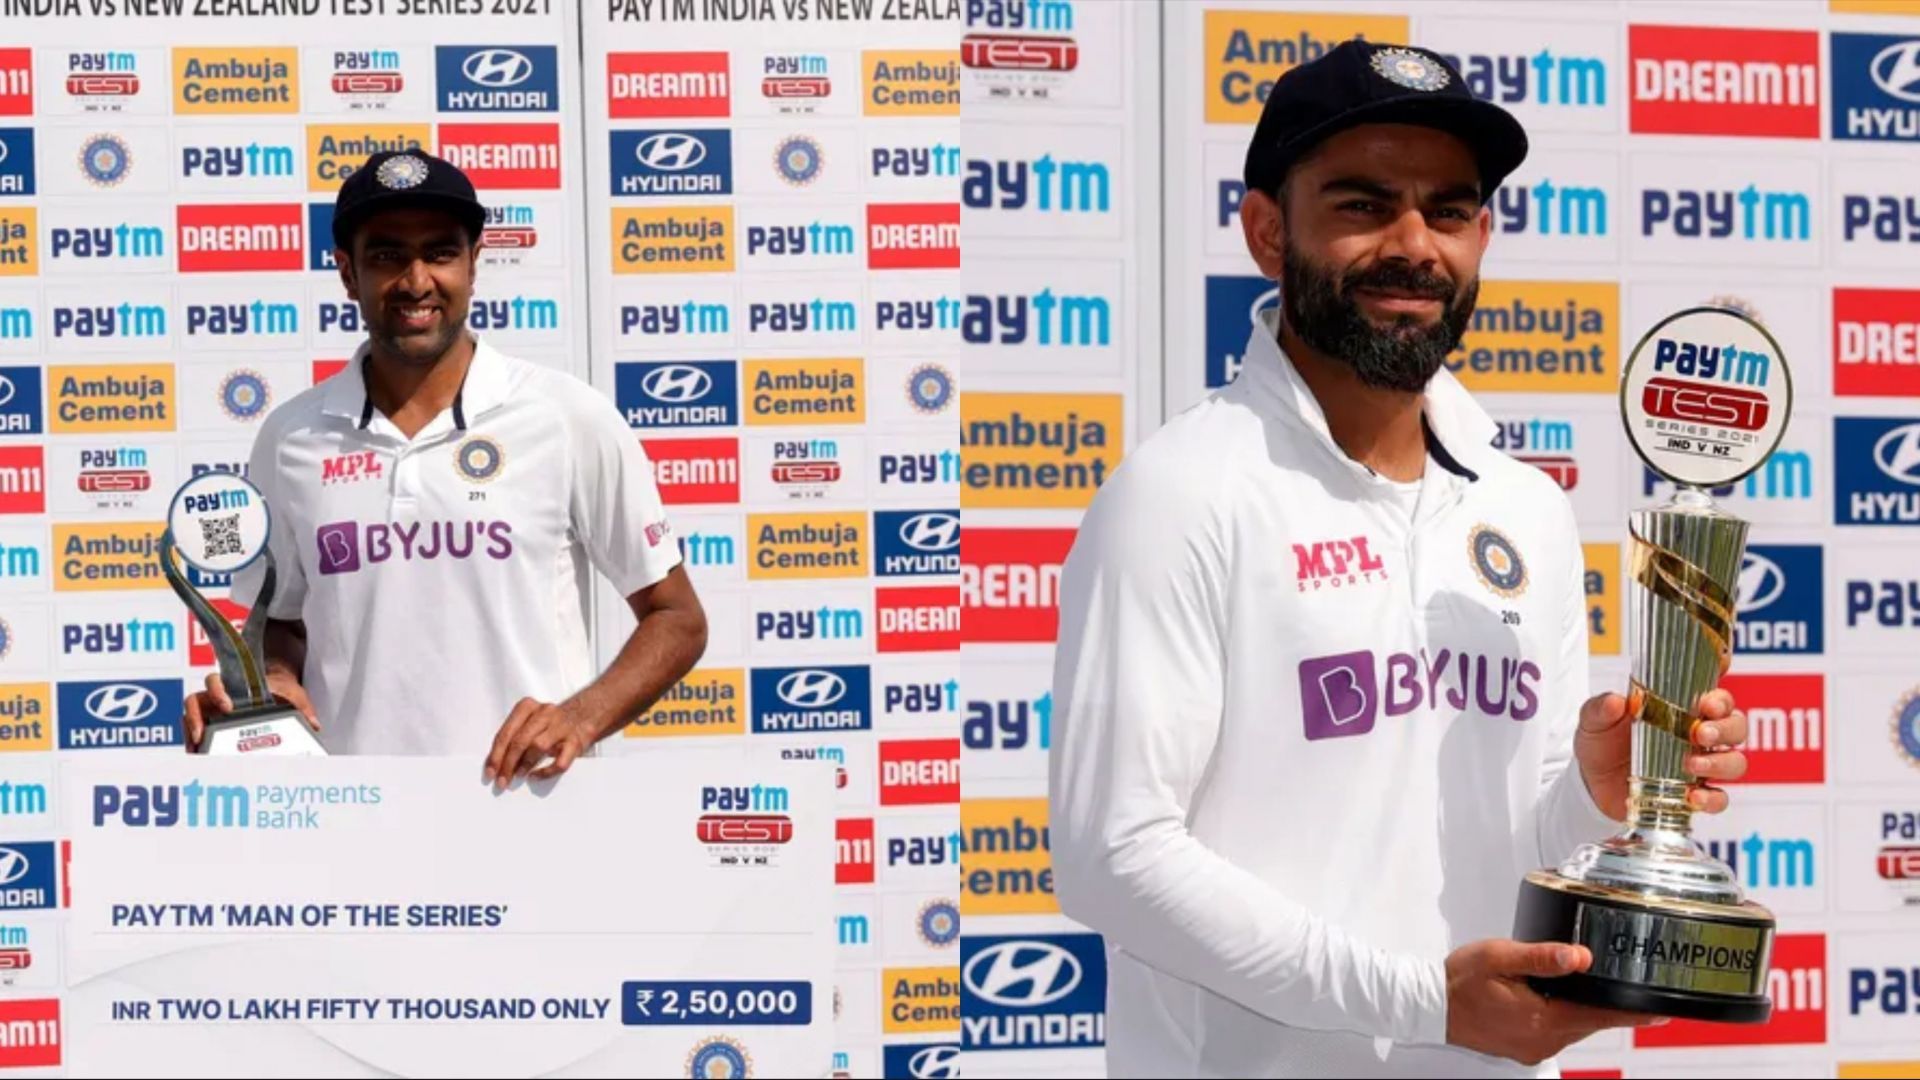 Ravichandran Ashwin (L) and Virat Kohli created unique records on the final day of the India vs New Zealand Test series (Image Courtesy: BCCI)